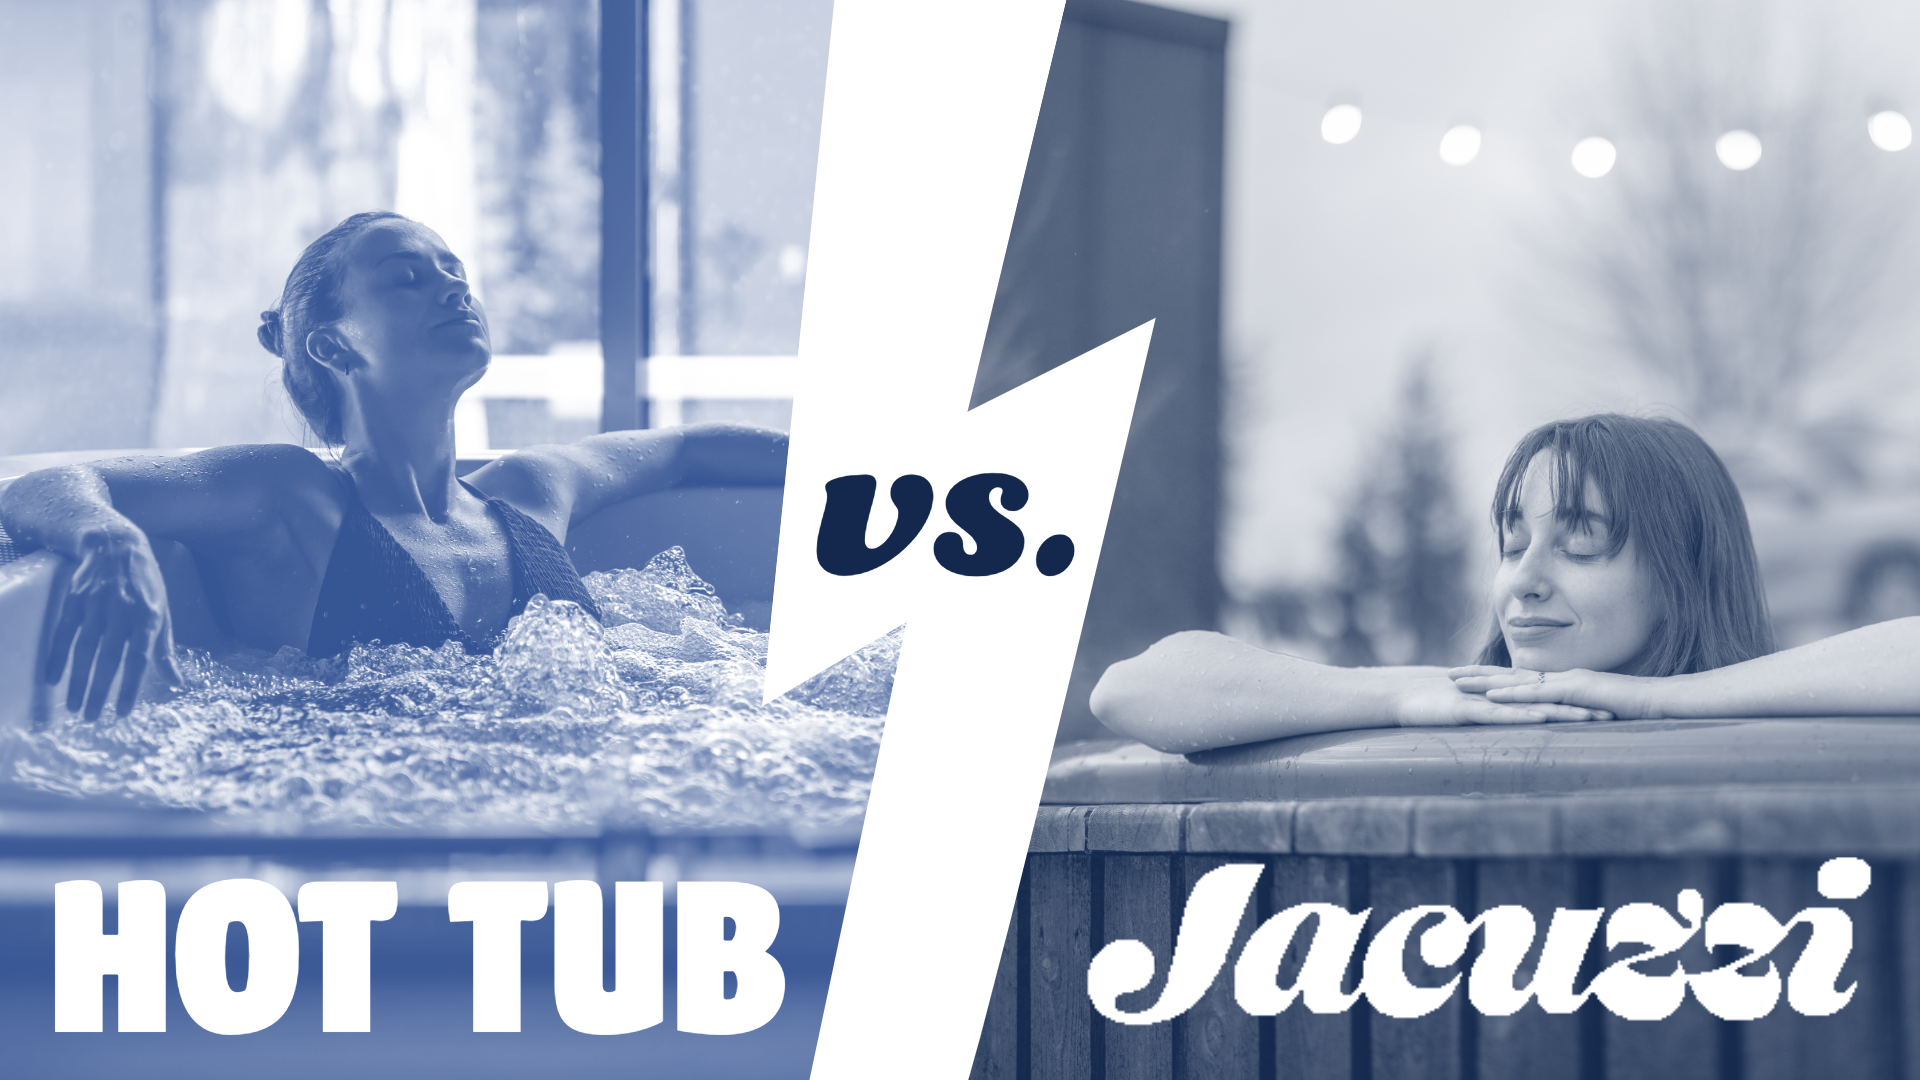 Hot tub vs Jacuzzi differences - which one is best for you? 